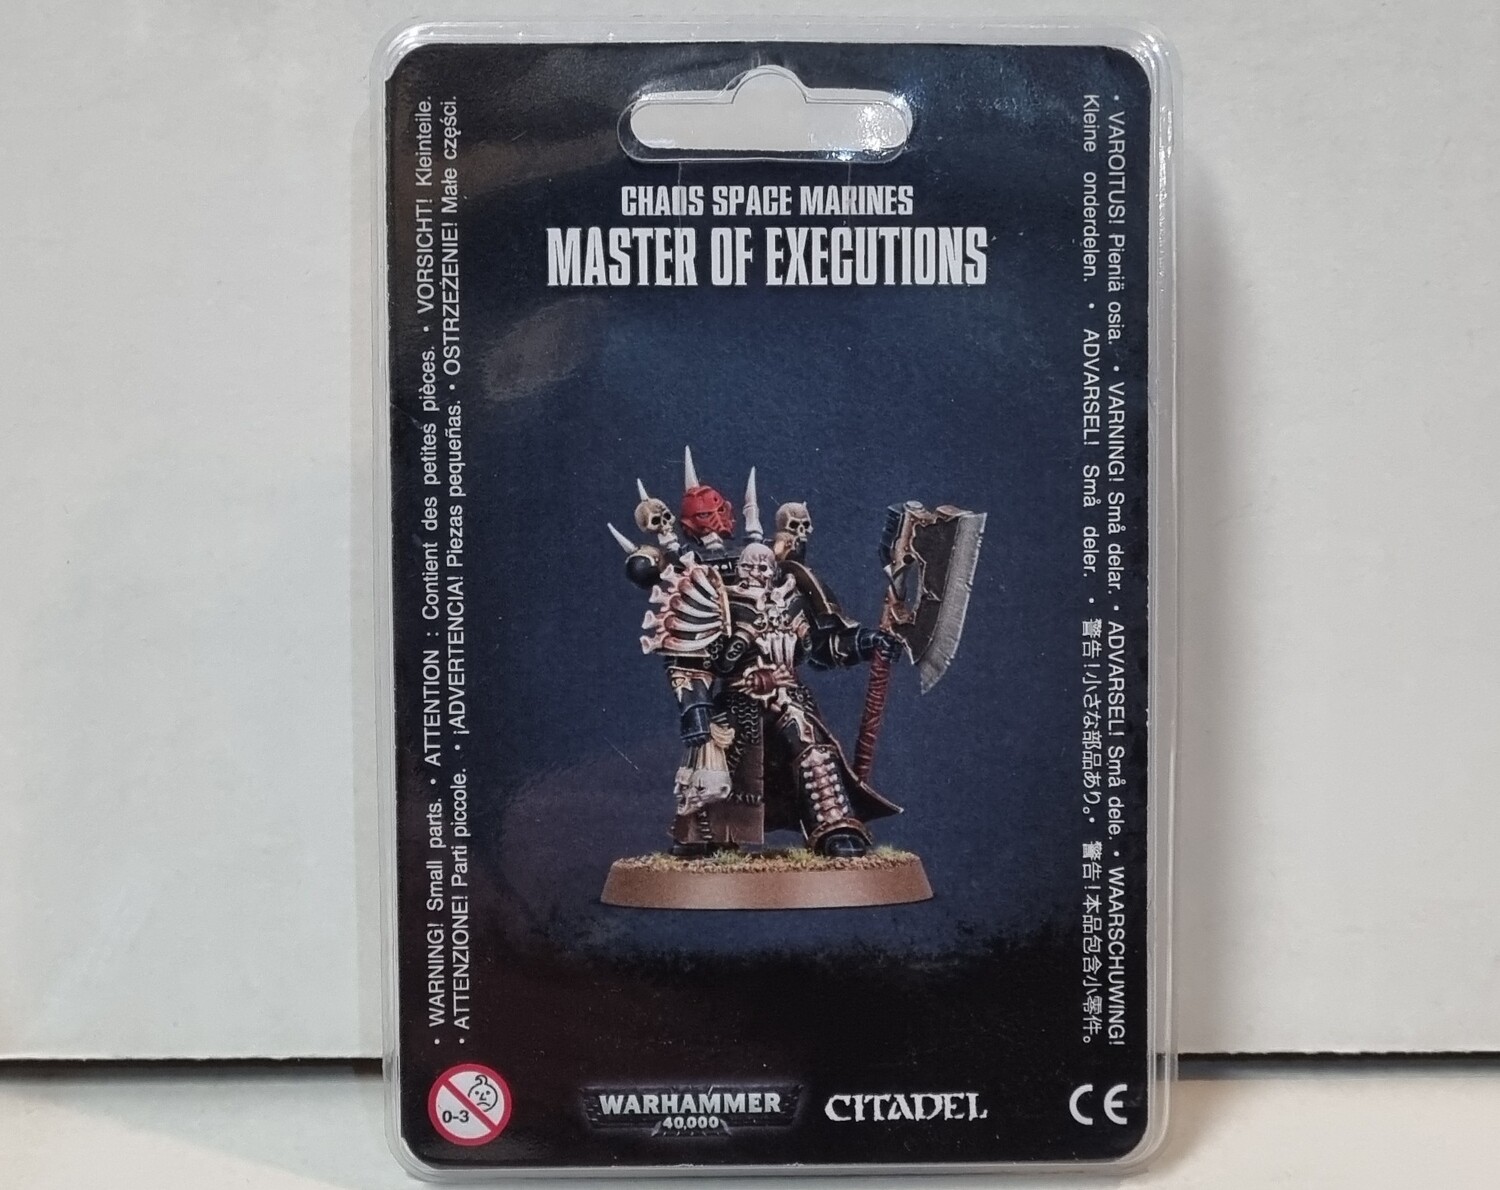 Warhammer, 40k, 43-44, Chaos Space Marines, Master of Executions